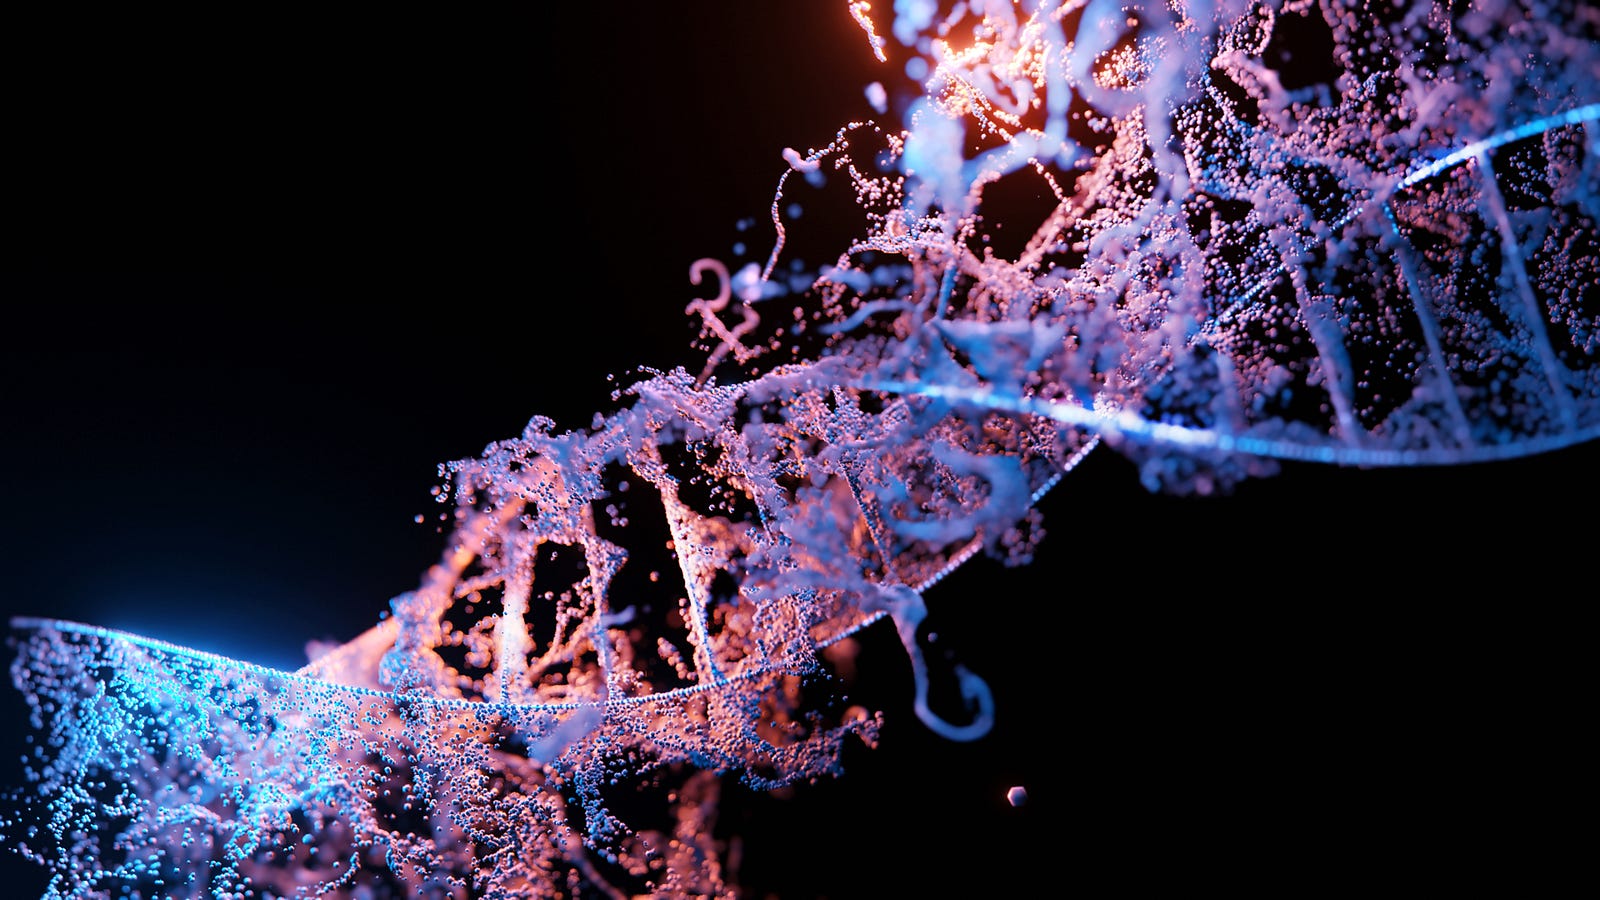 An illustration of a strand of DNA, colored in blue. Pink RNA pulls away from it. One of the most well-known genetic factors associated with breast cancer risk is mutations in the BRCA1 (BReast CAncer1)and BRCA2 genes. BRCA genes signal the production of proteins that help repair damaged DNA and maintain genome integrity.